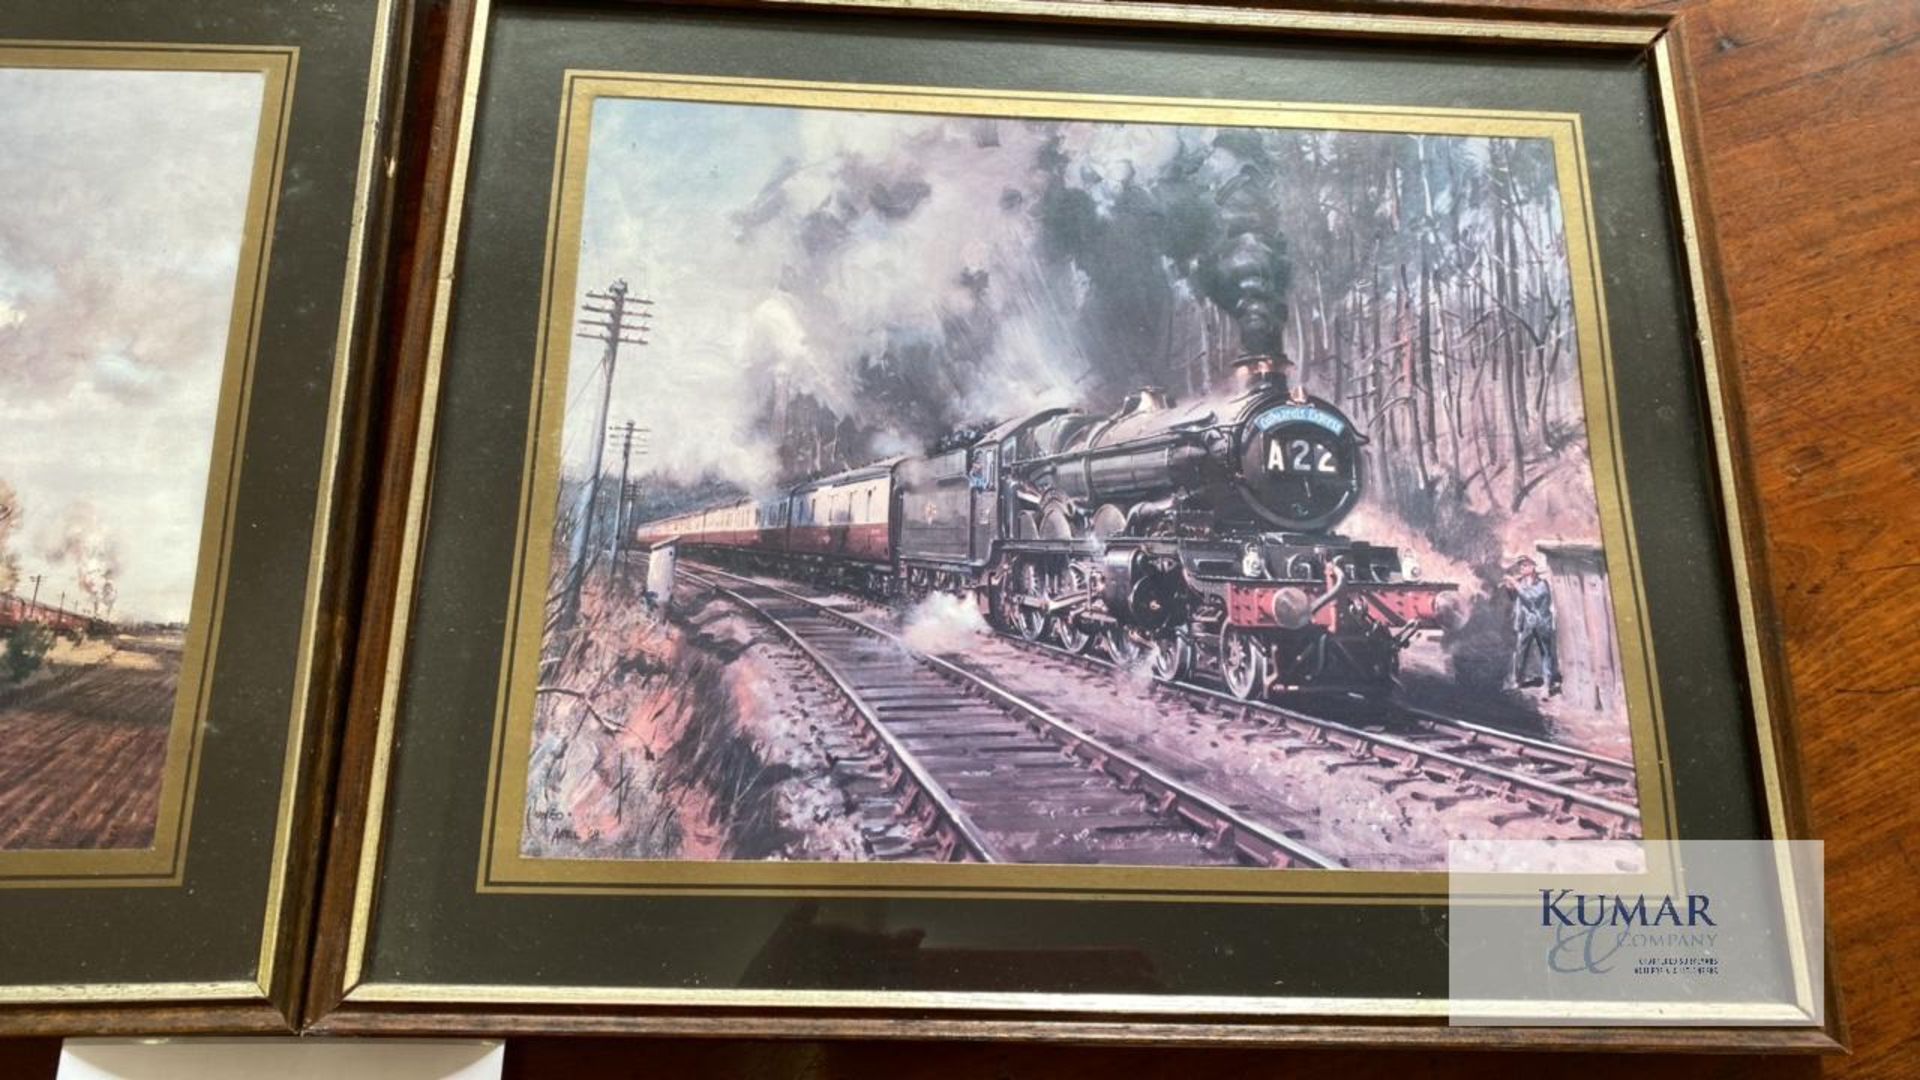 Train pictures in frames - Image 8 of 18